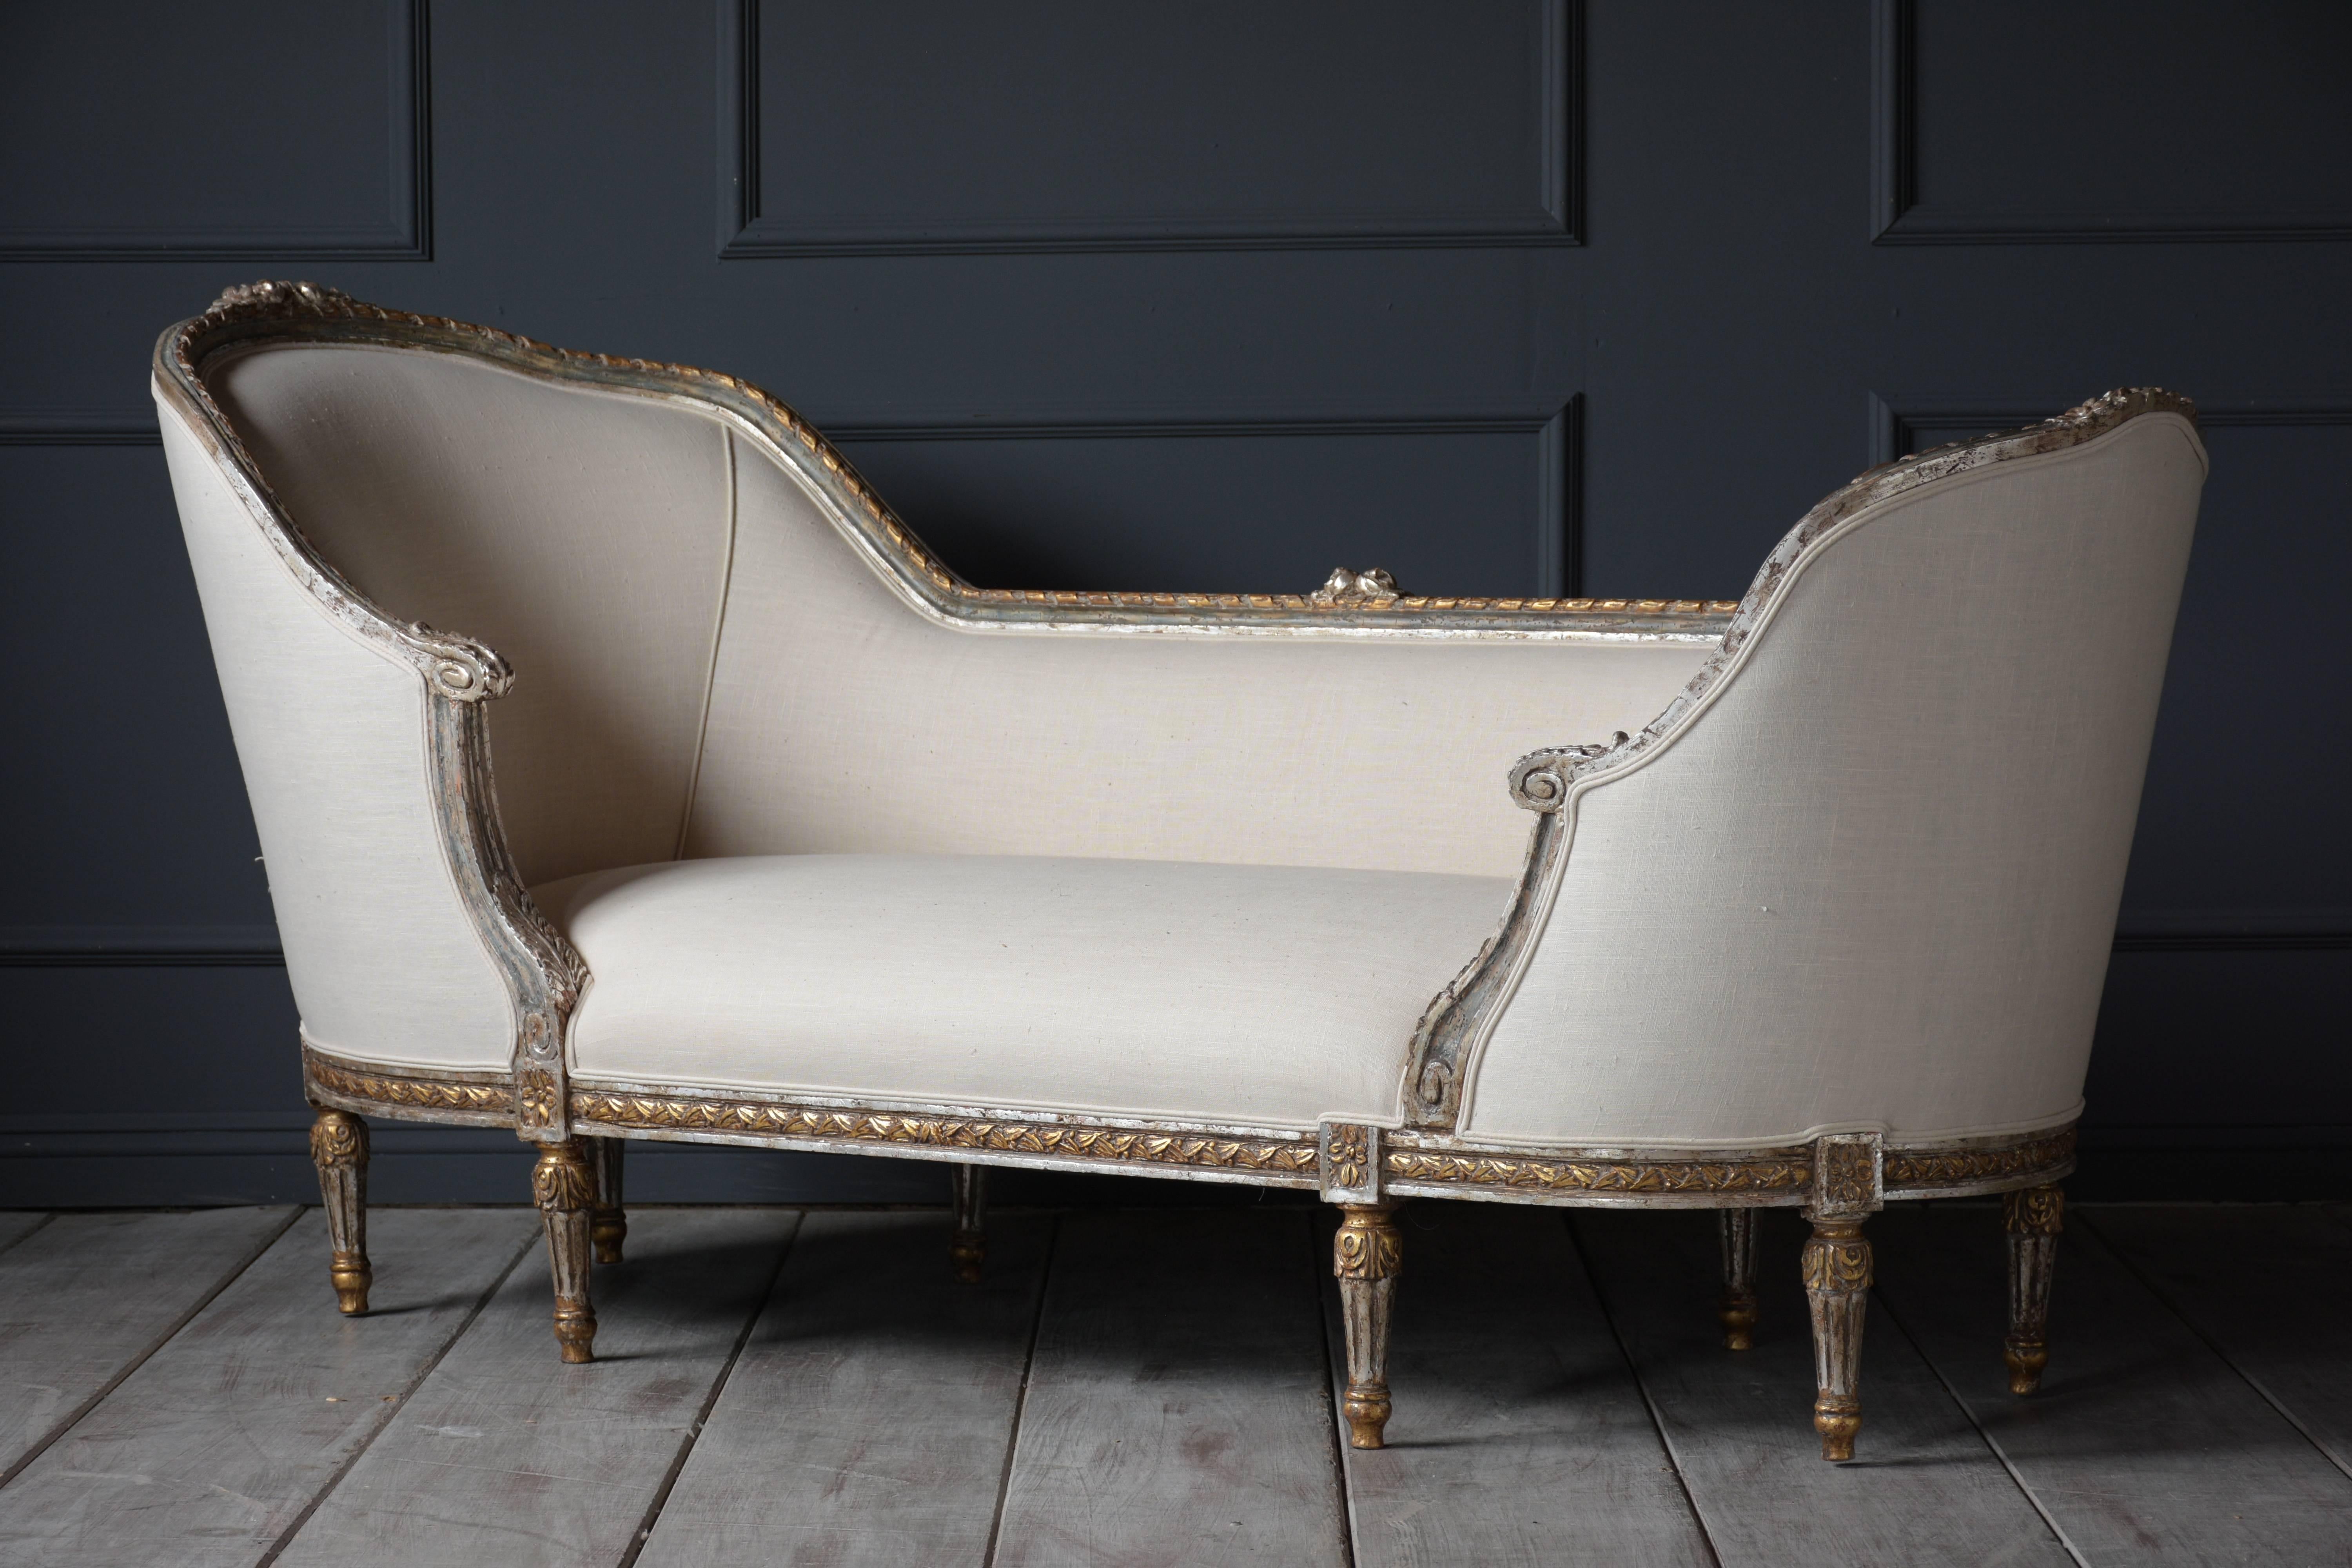 Antique French Louis XVI Style Gondola Chaise Lounge with Giltwood Frame 7